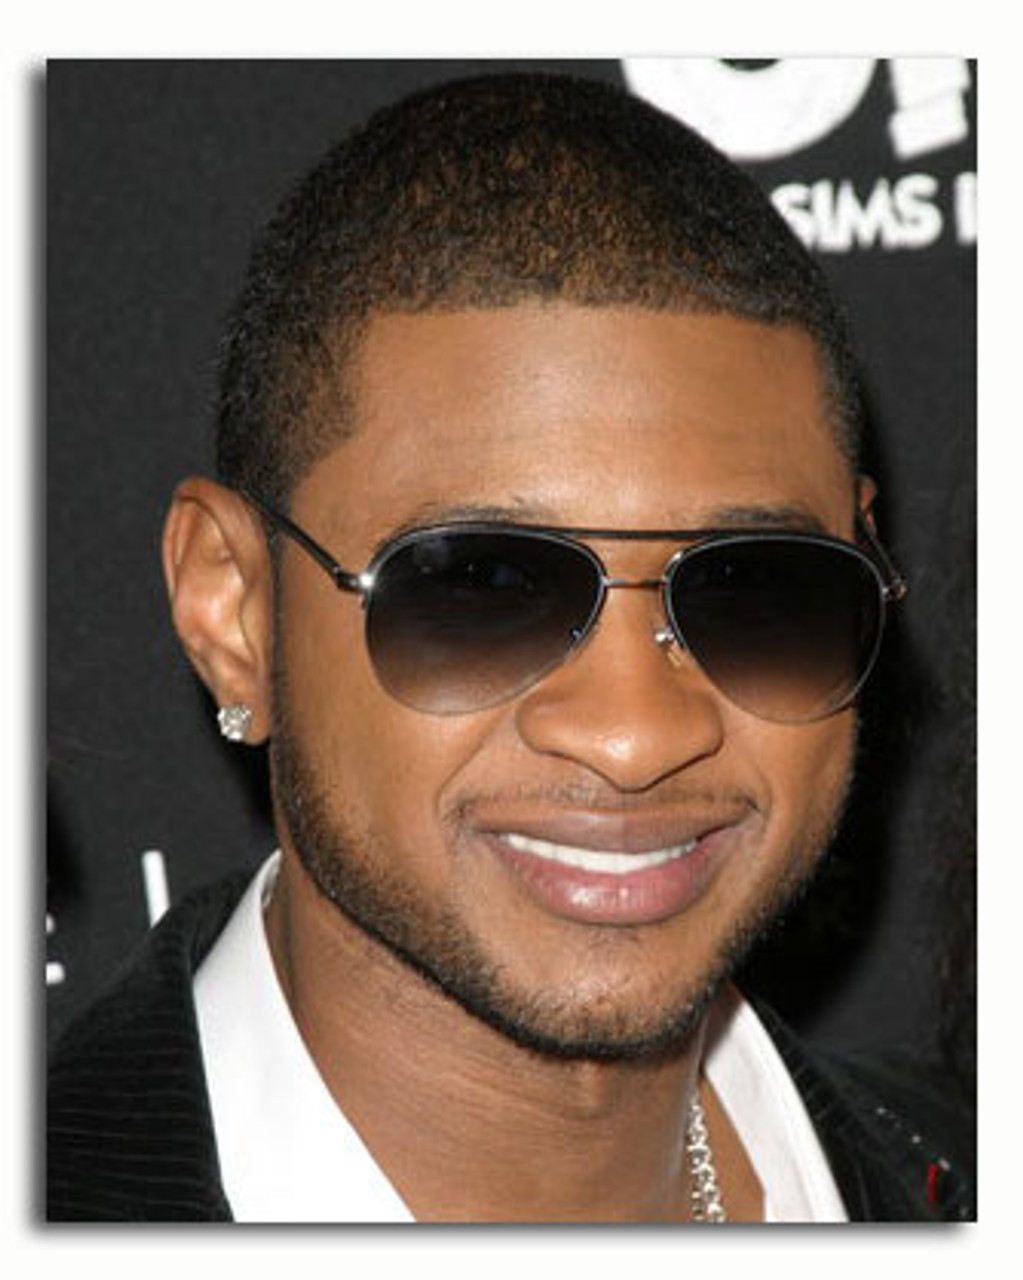 usher raymond song papers